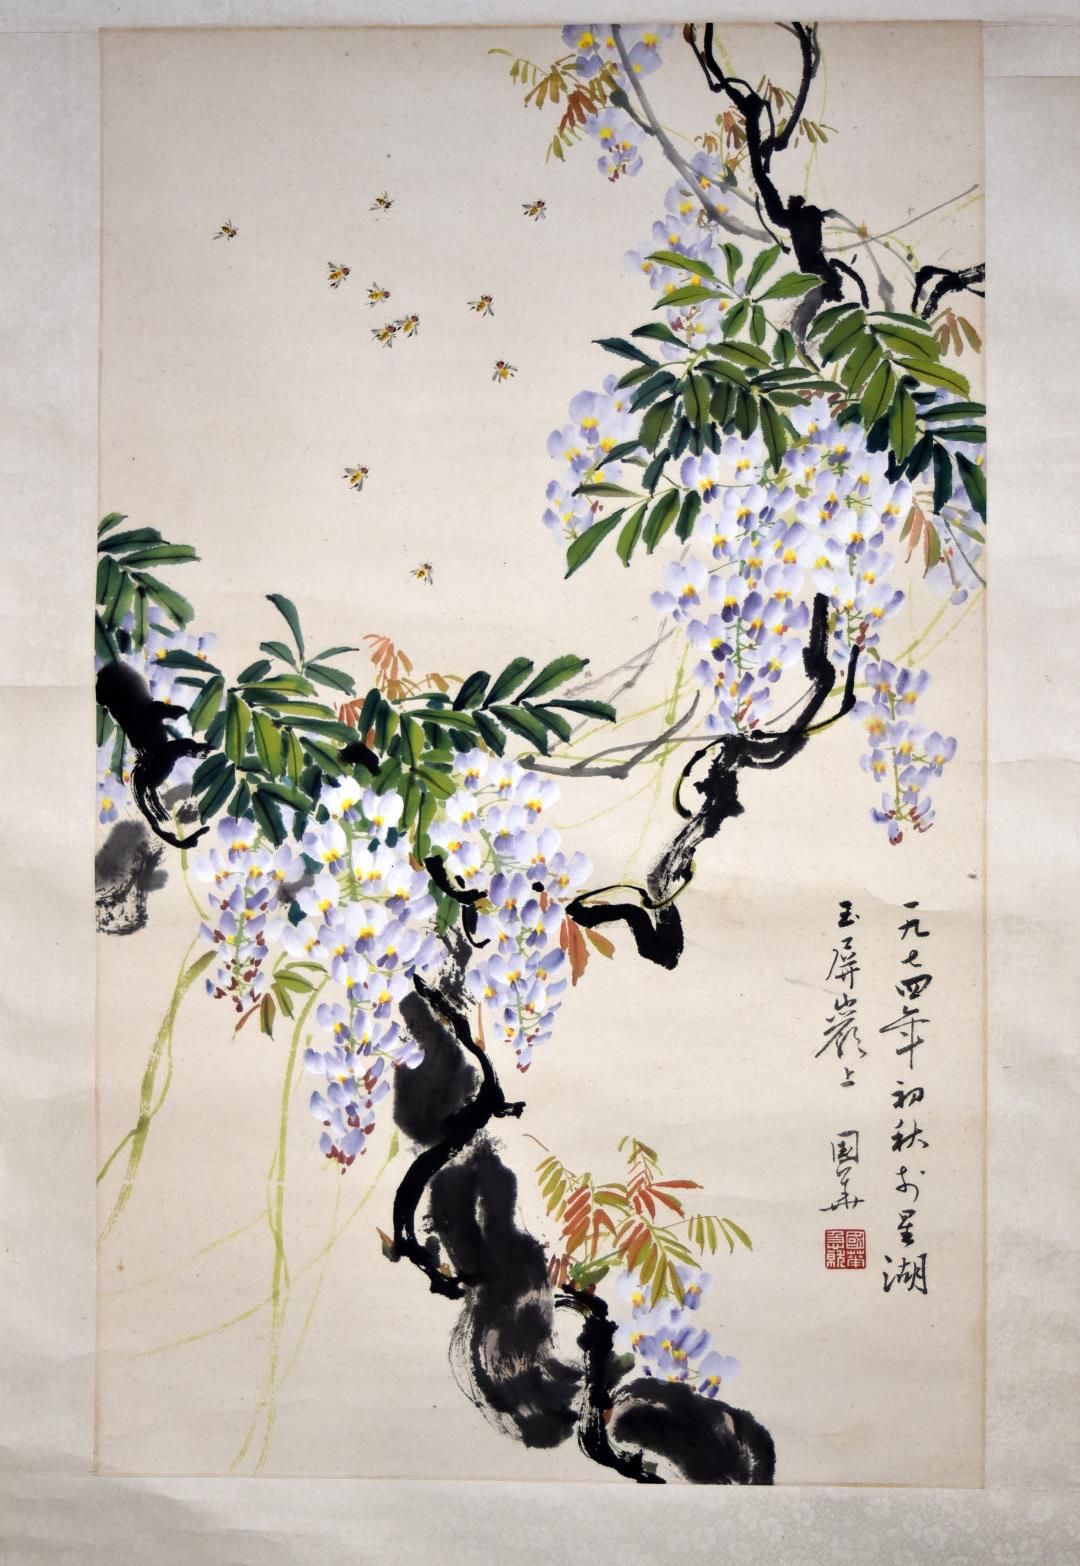 Null JAPAN - SHOWA period (1926-1989)

Gouache on paper with bees in flight amon&hellip;